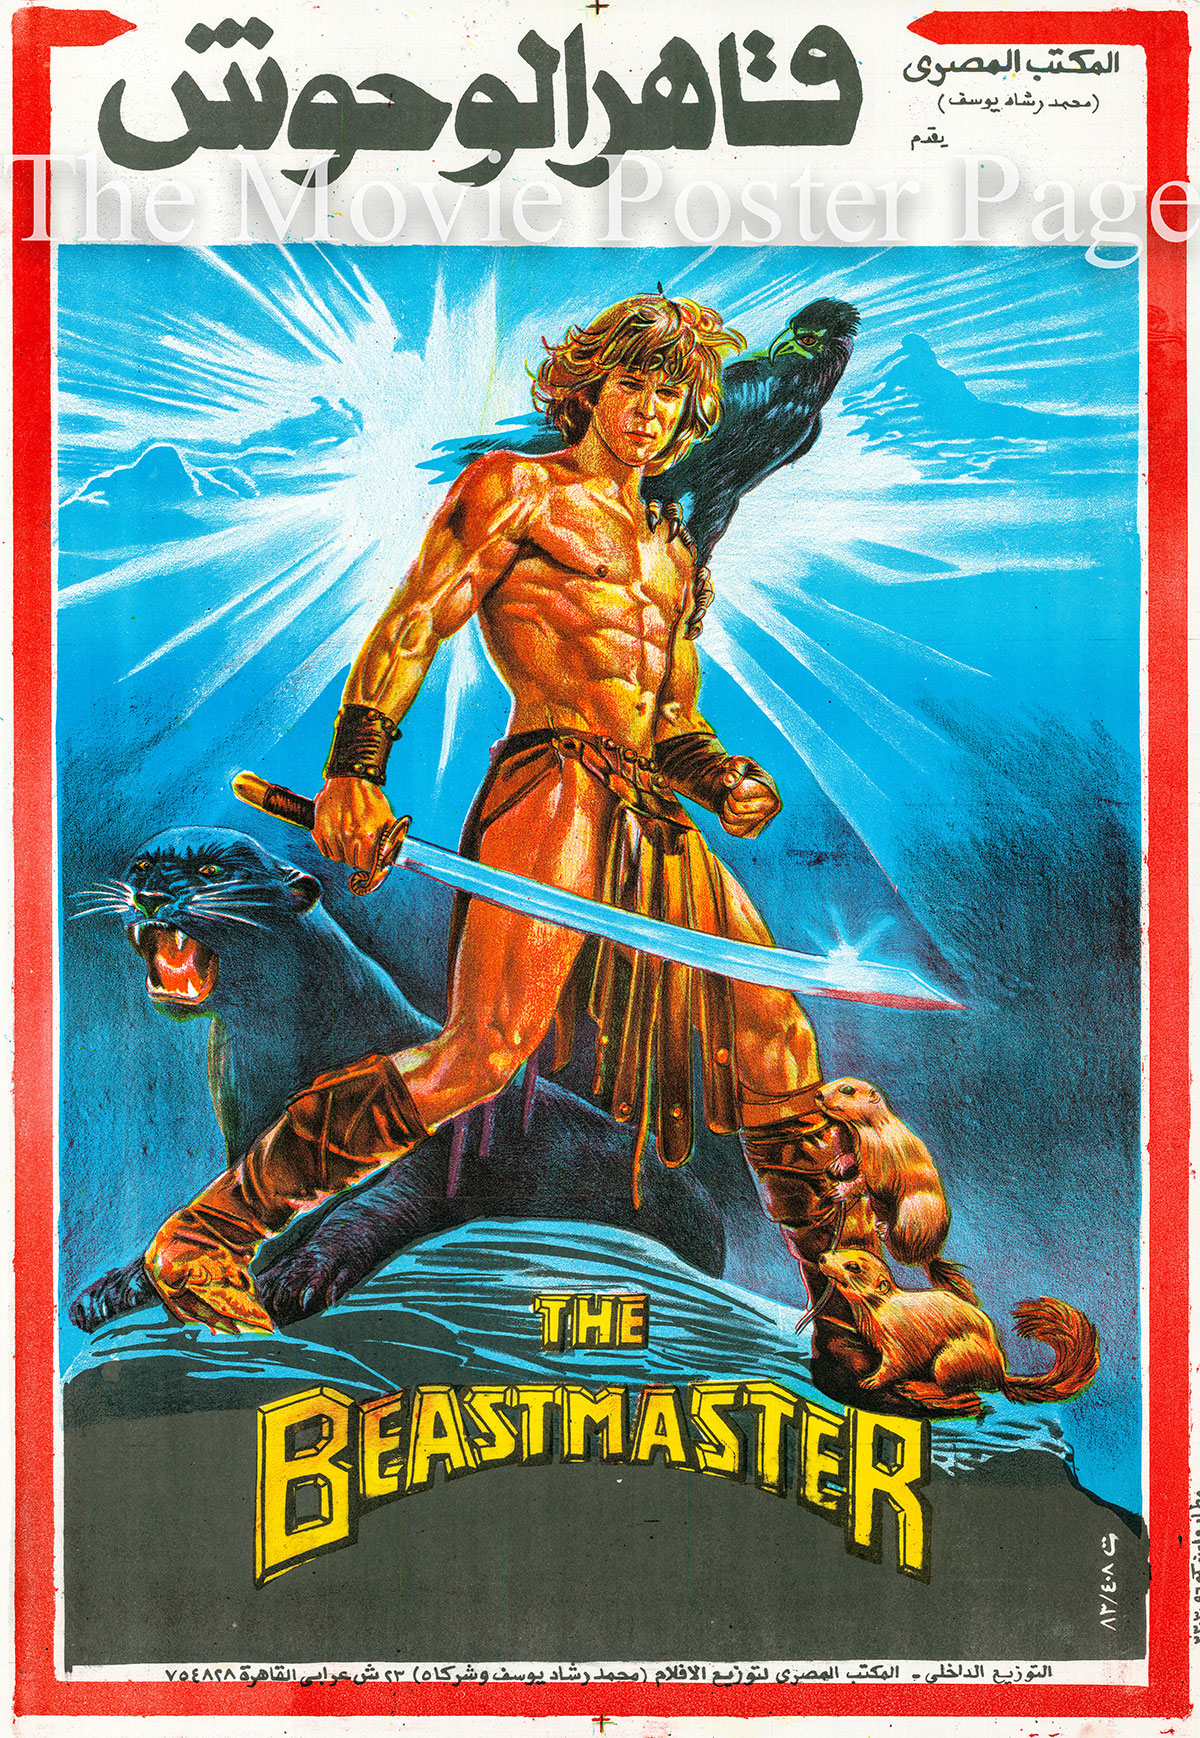 The Beastmaster #7